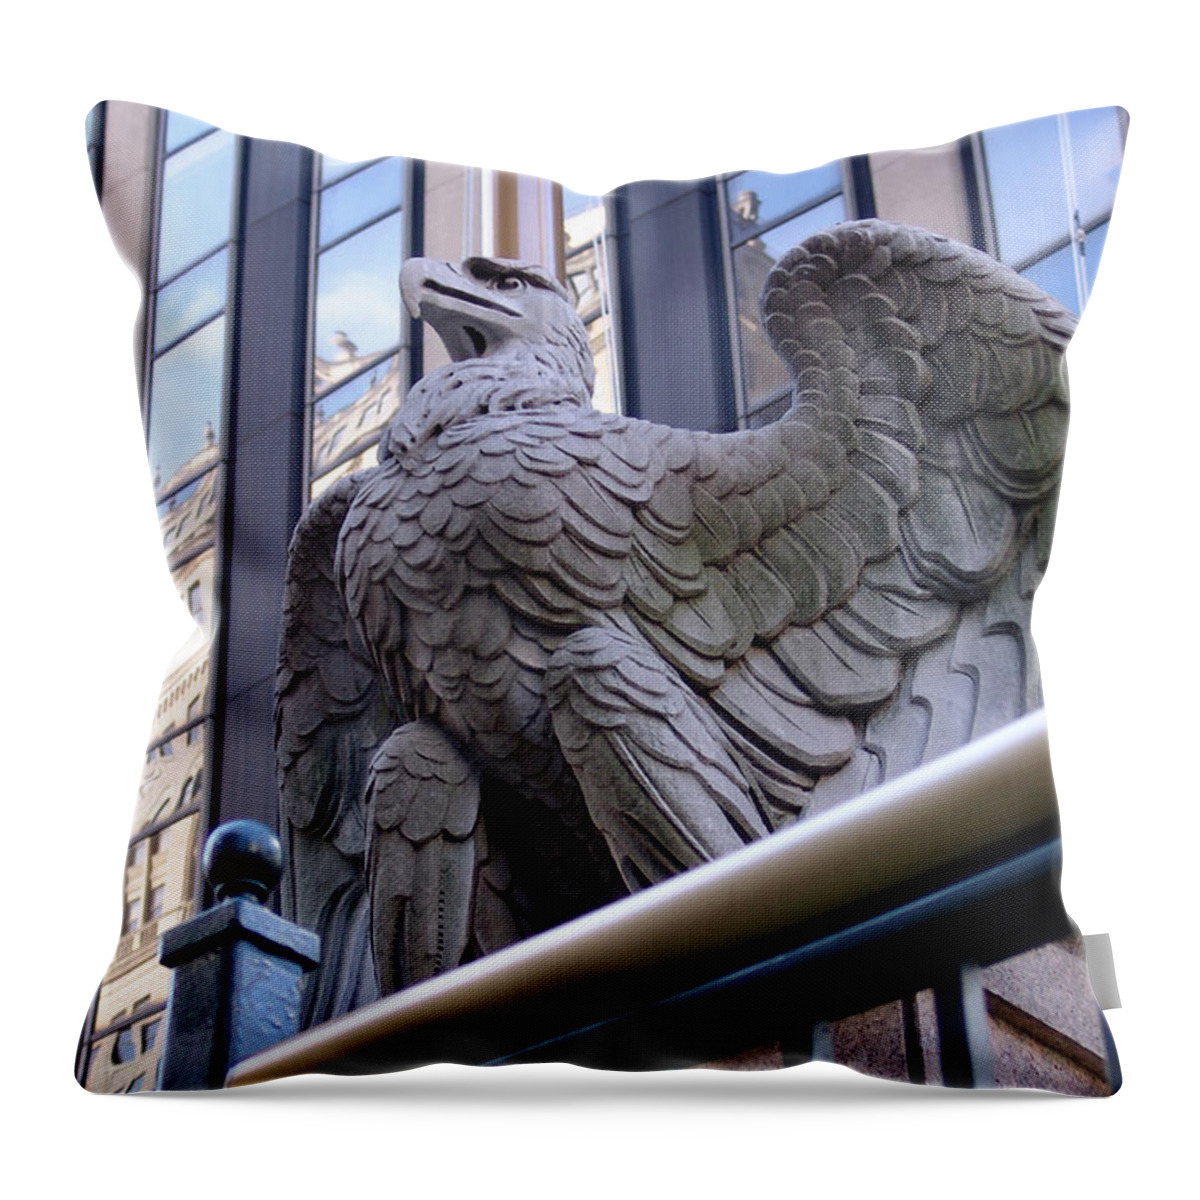 Eagle Throw Pillow featuring the photograph Standing Tall by DiDesigns Graphics